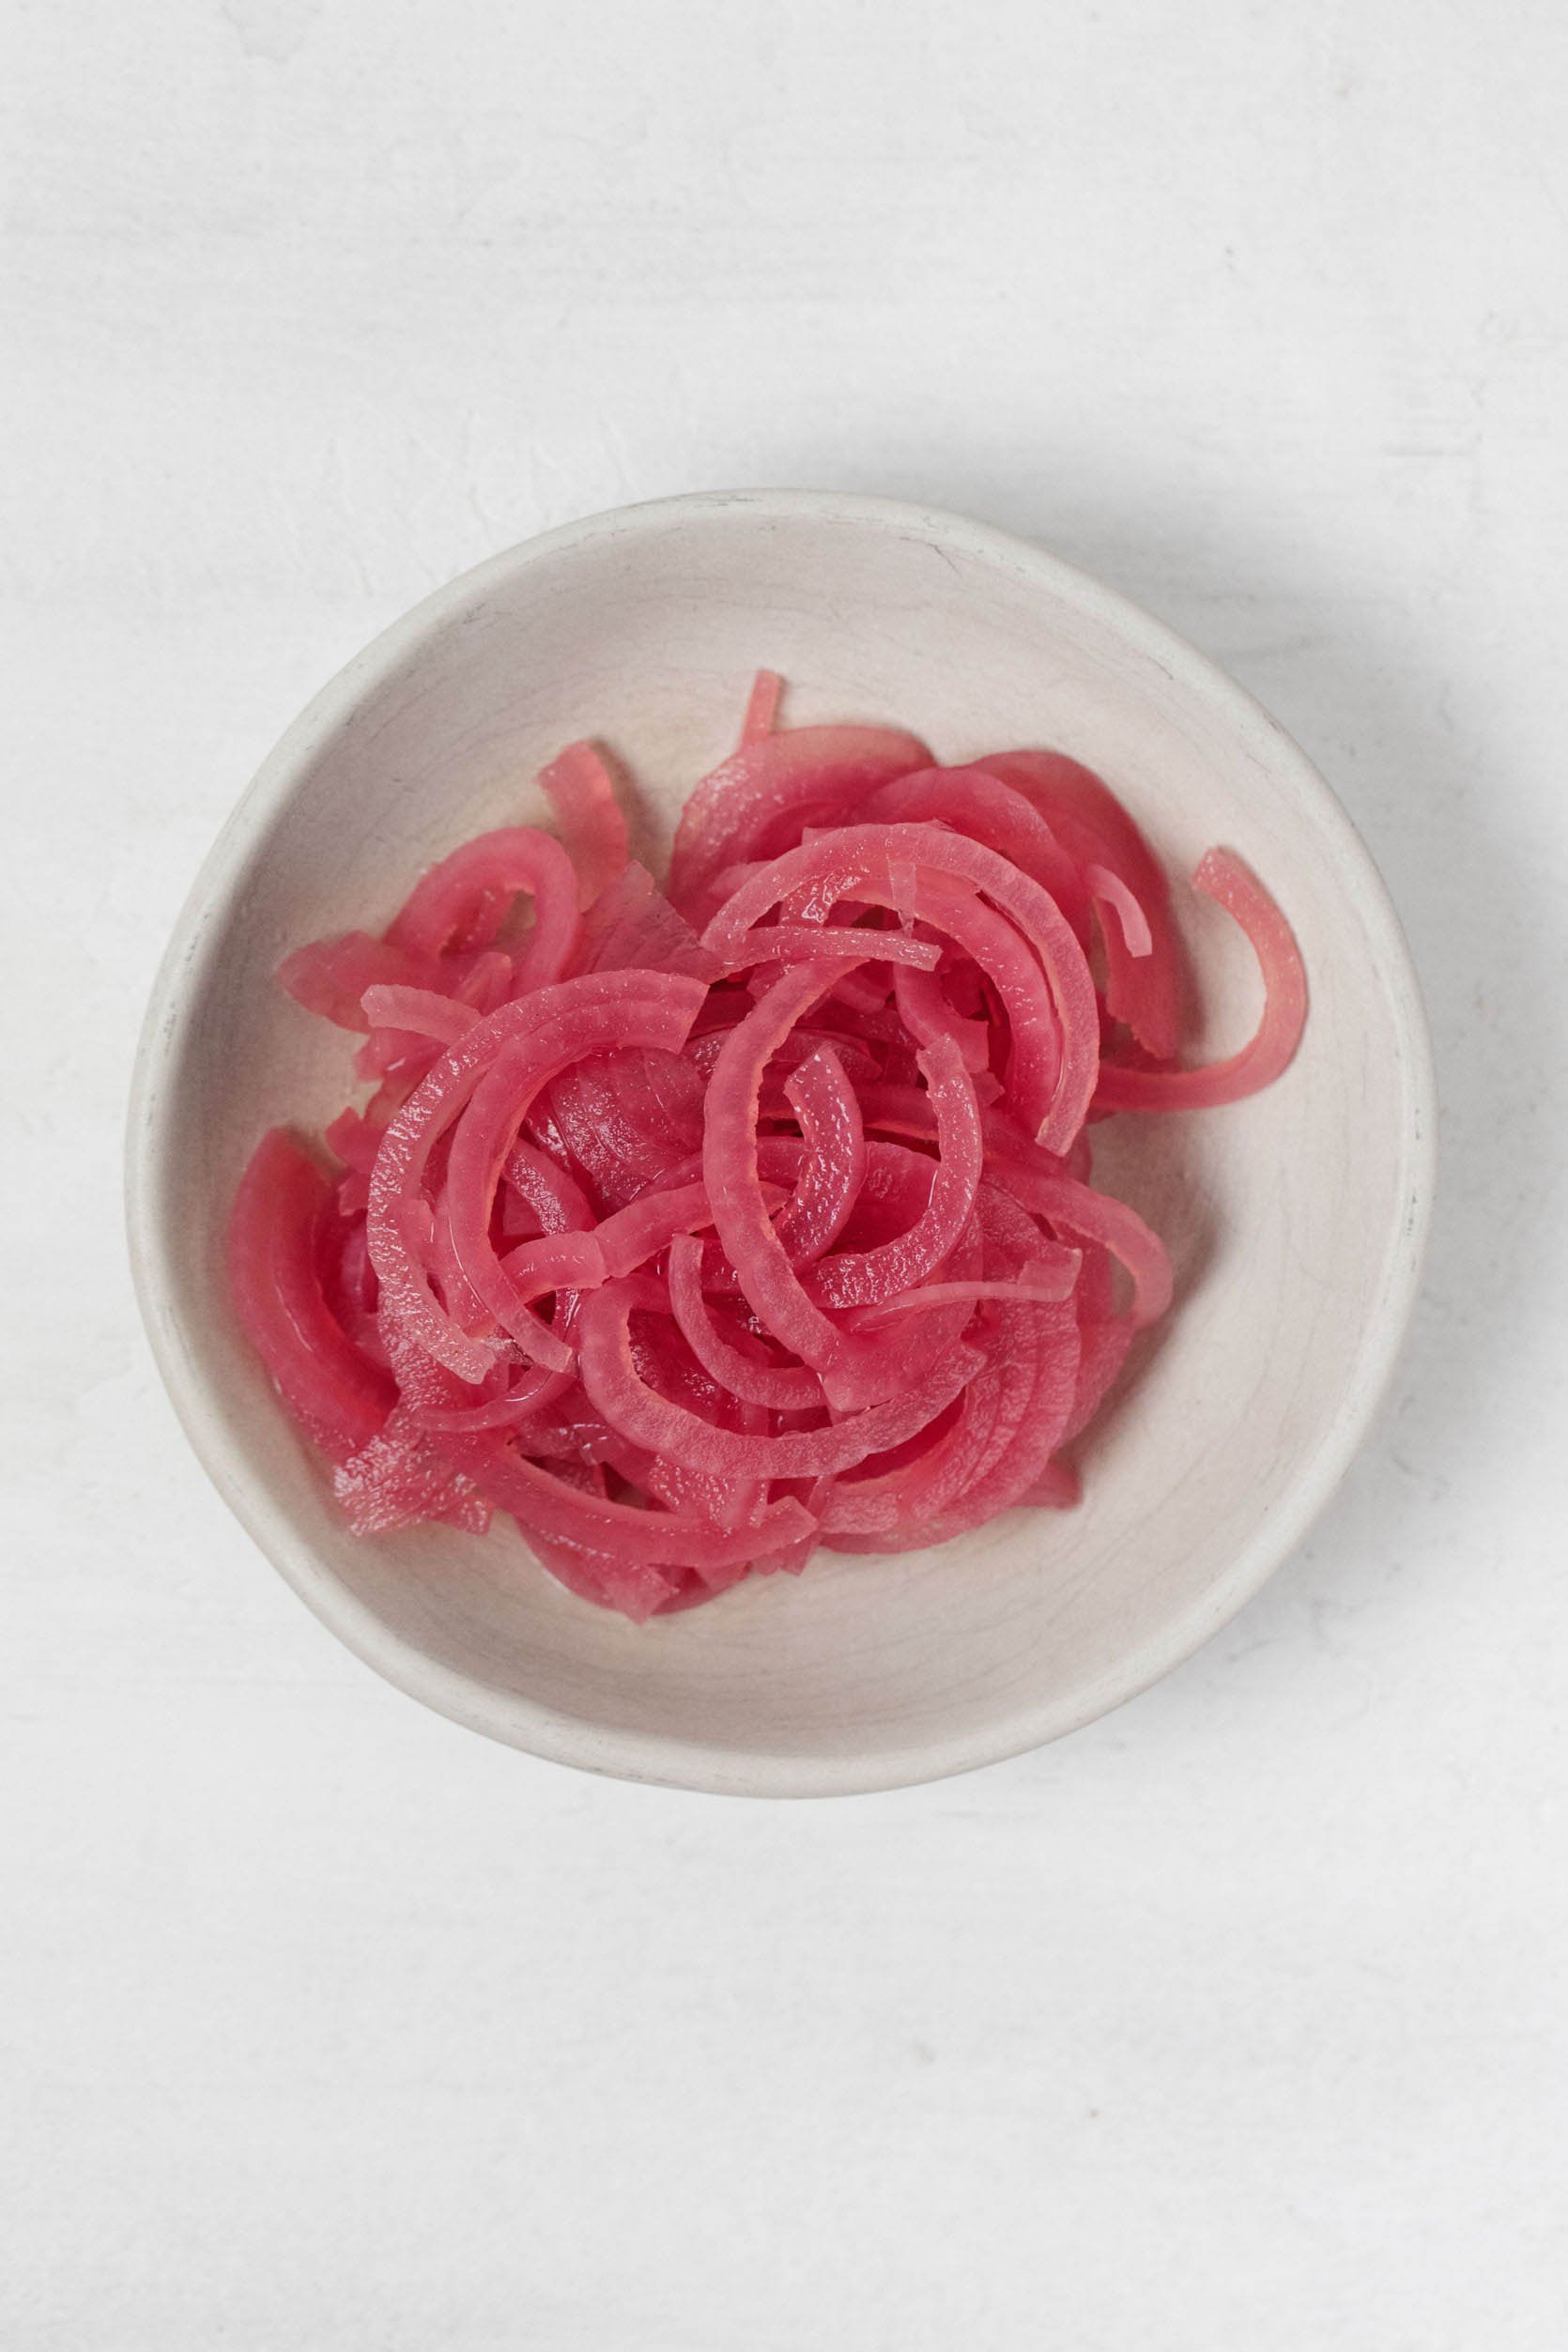 https://www.thefullhelping.com/wp-content/uploads/2022/11/quick-pickled-onions-4.jpg